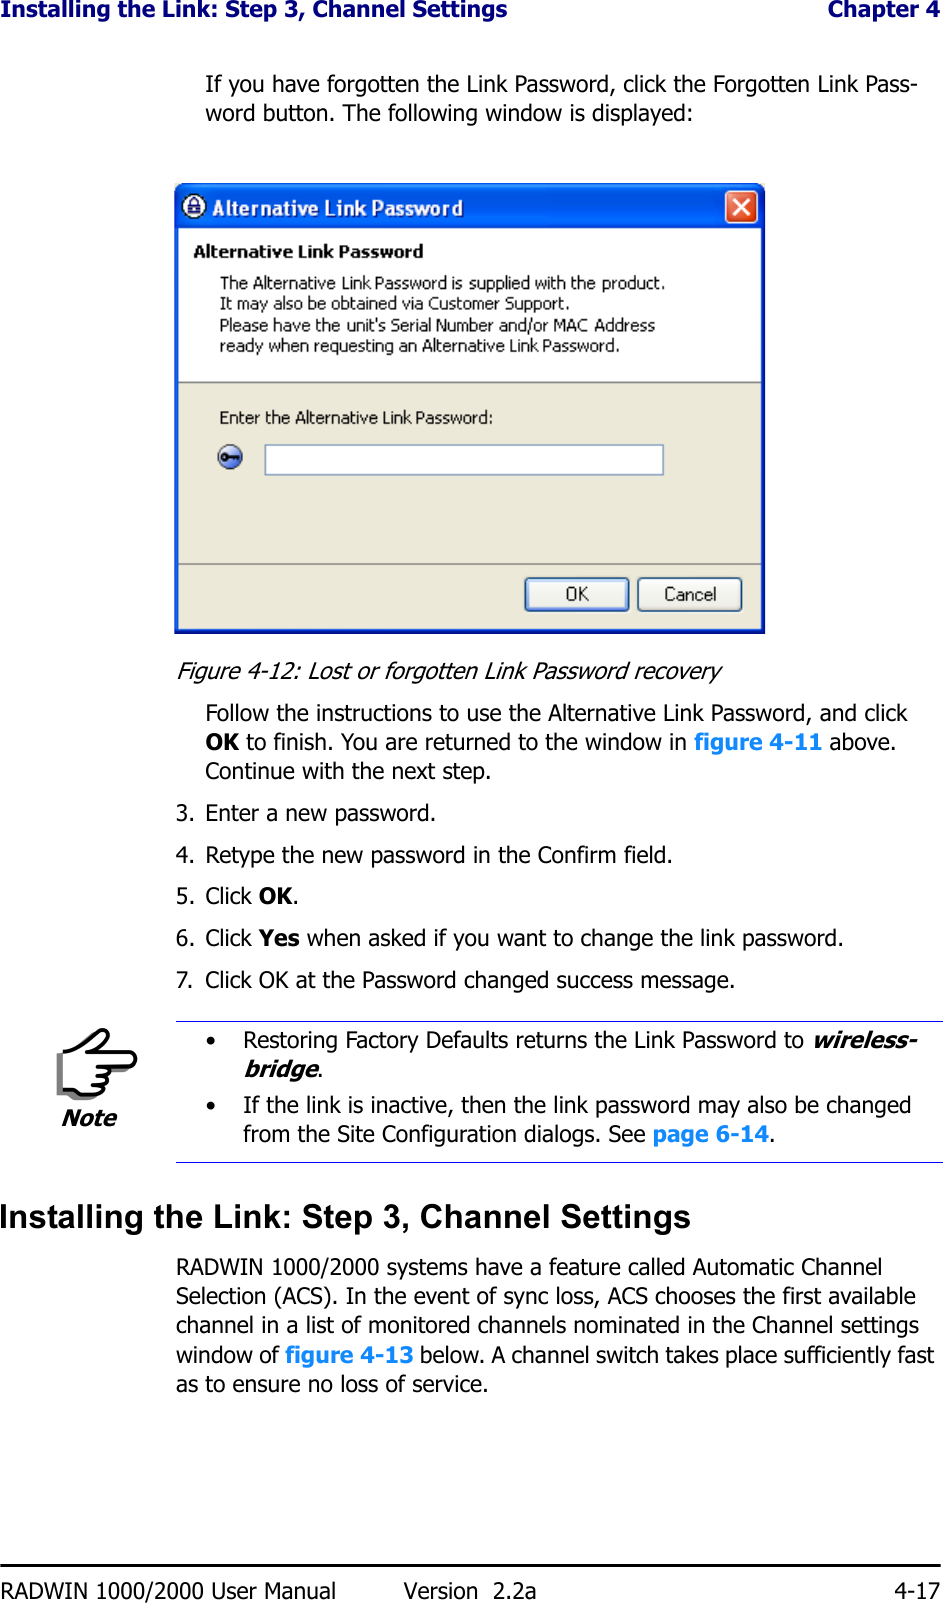 Installing the Link: Step 3, Channel Settings  Chapter 4RADWIN 1000/2000 User Manual Version  2.2a 4-17If you have forgotten the Link Password, click the Forgotten Link Pass-word button. The following window is displayed:Figure 4-12: Lost or forgotten Link Password recoveryFollow the instructions to use the Alternative Link Password, and click OK to finish. You are returned to the window in figure 4-11 above. Continue with the next step.3. Enter a new password.4. Retype the new password in the Confirm field.5. Click OK.6. Click Yes when asked if you want to change the link password.7. Click OK at the Password changed success message.Installing the Link: Step 3, Channel SettingsRADWIN 1000/2000 systems have a feature called Automatic Channel Selection (ACS). In the event of sync loss, ACS chooses the first available channel in a list of monitored channels nominated in the Channel settings window of figure 4-13 below. A channel switch takes place sufficiently fast as to ensure no loss of service.Note• Restoring Factory Defaults returns the Link Password to wireless-bridge.• If the link is inactive, then the link password may also be changed from the Site Configuration dialogs. See page 6-14.